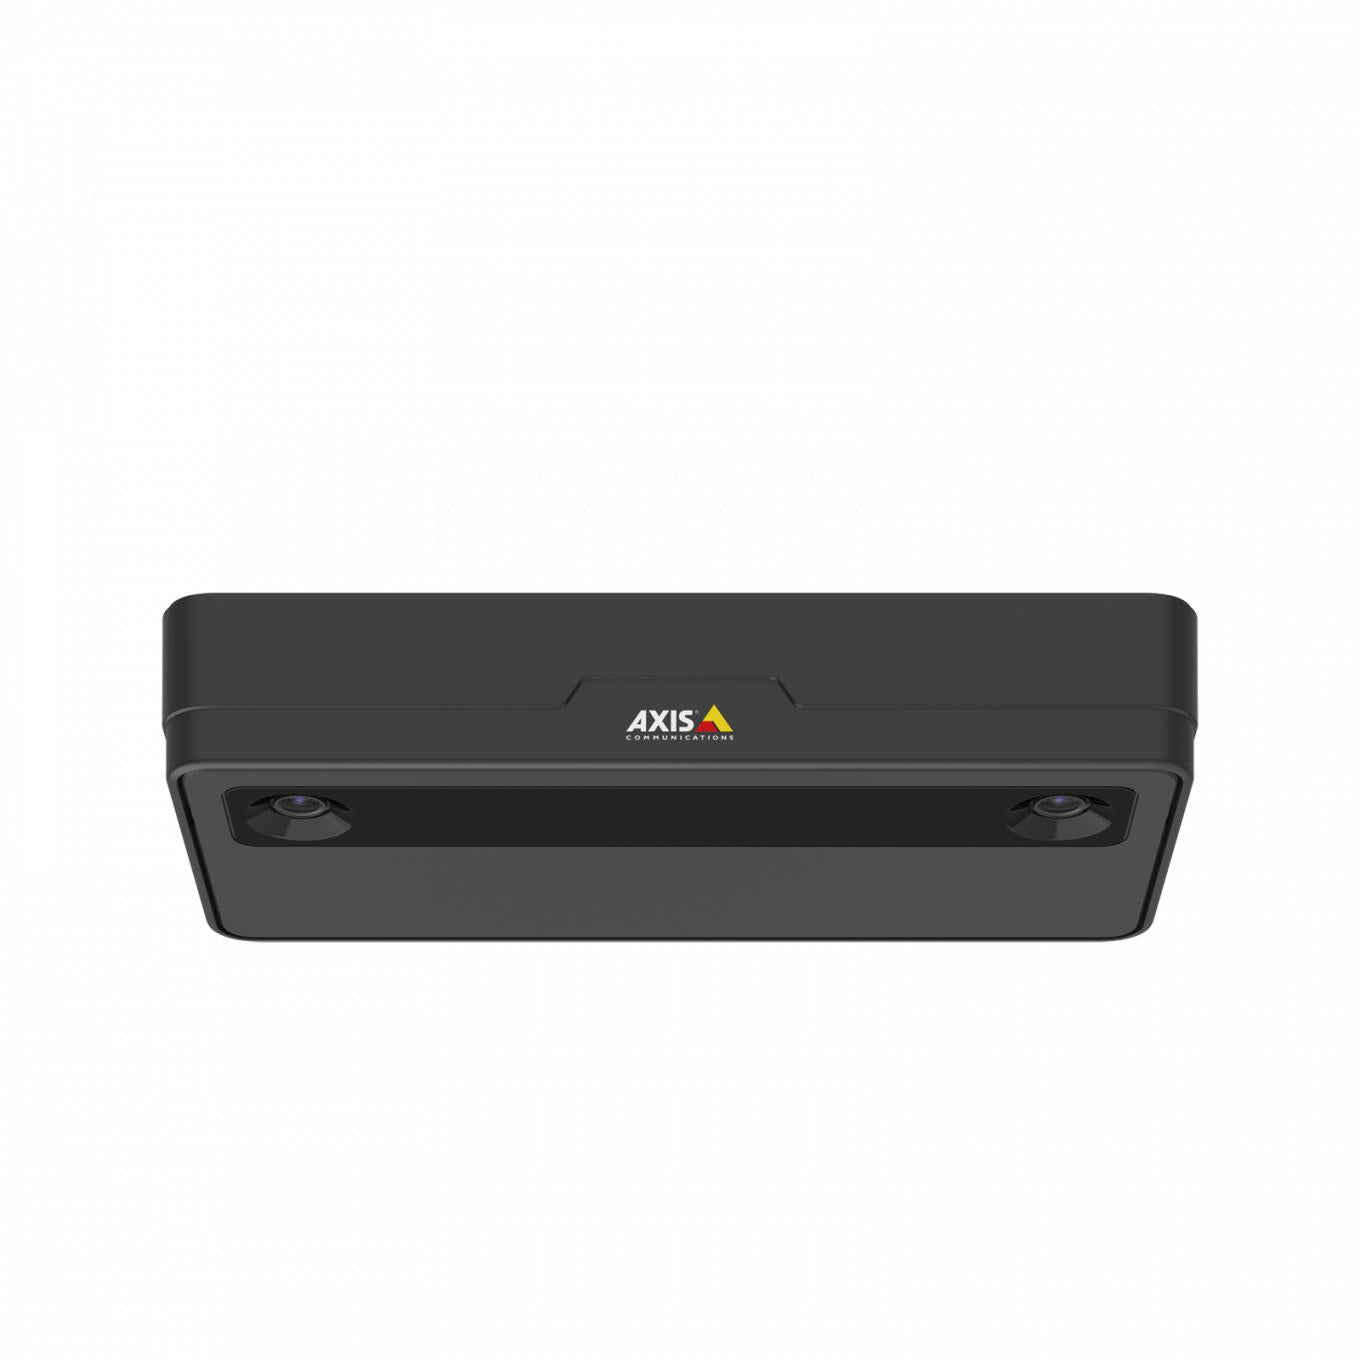 AXIS P8815-2 3D People Counter, Black